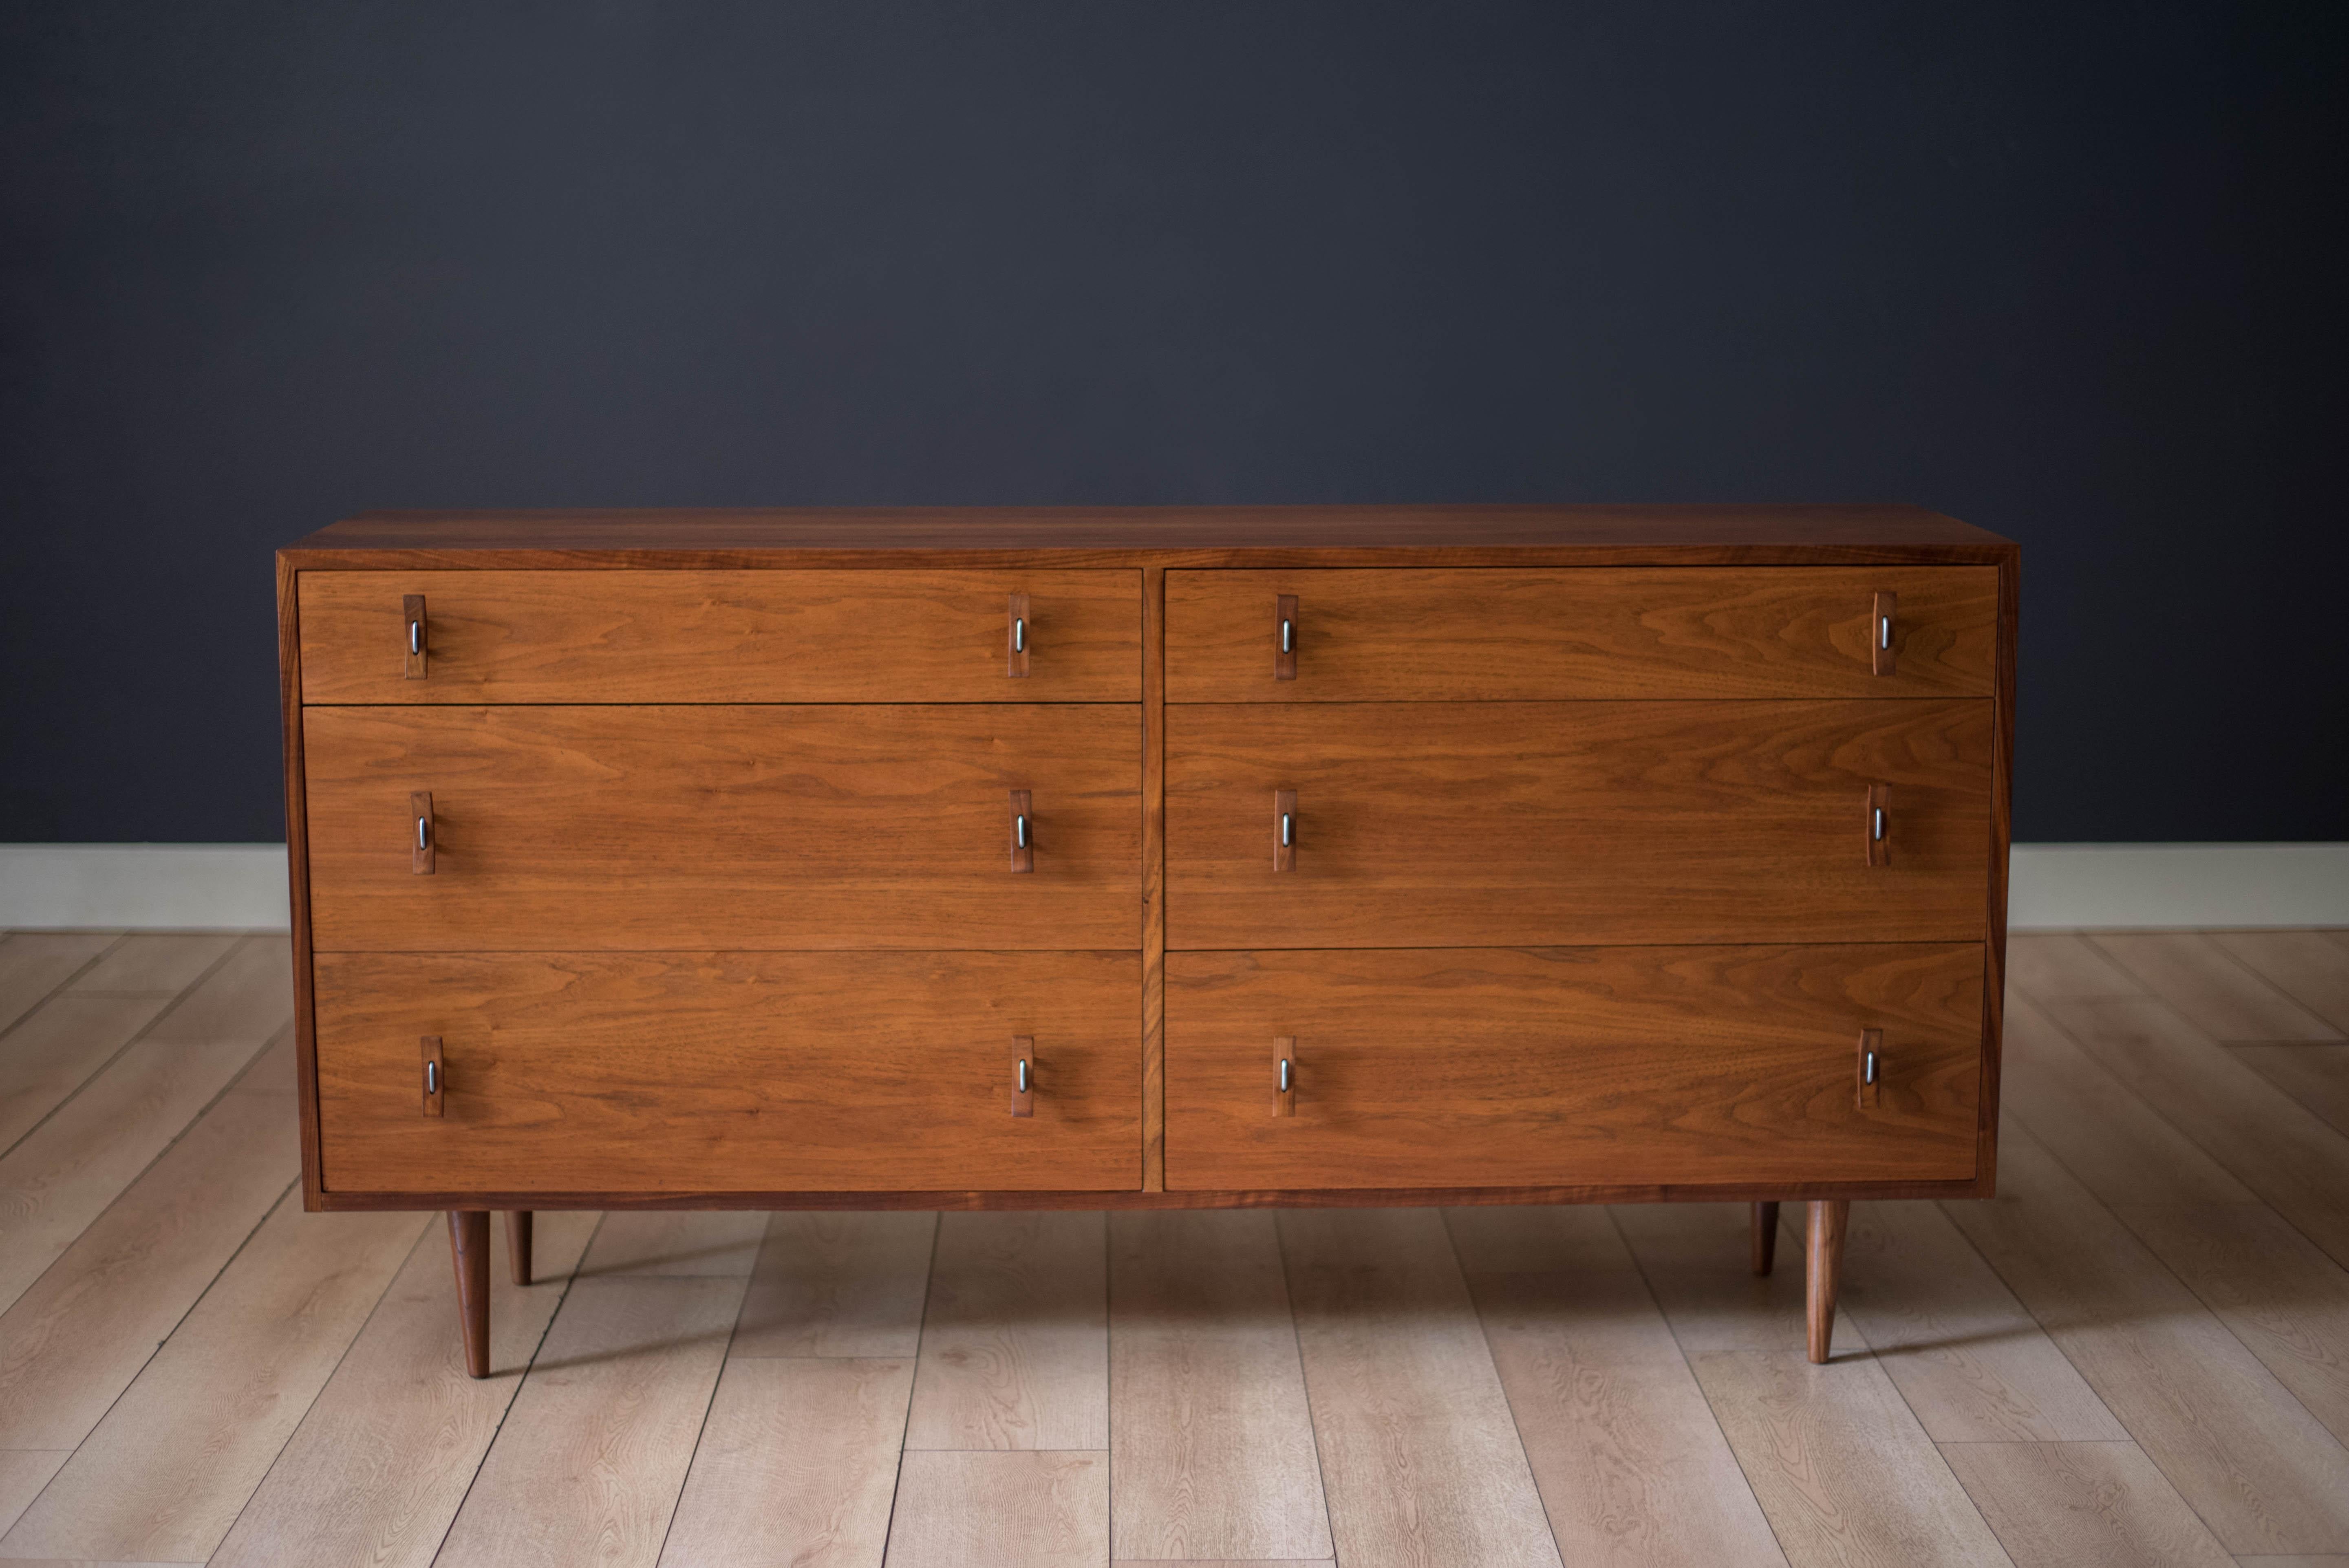 Vintage double dresser chest designed by Stanley Young for Glenn of California, circa 1950s. Features natural walnut variations in the grain pattern accessorized by floating bent metal and sculpted wood handles. Supported by classic midcentury dowel